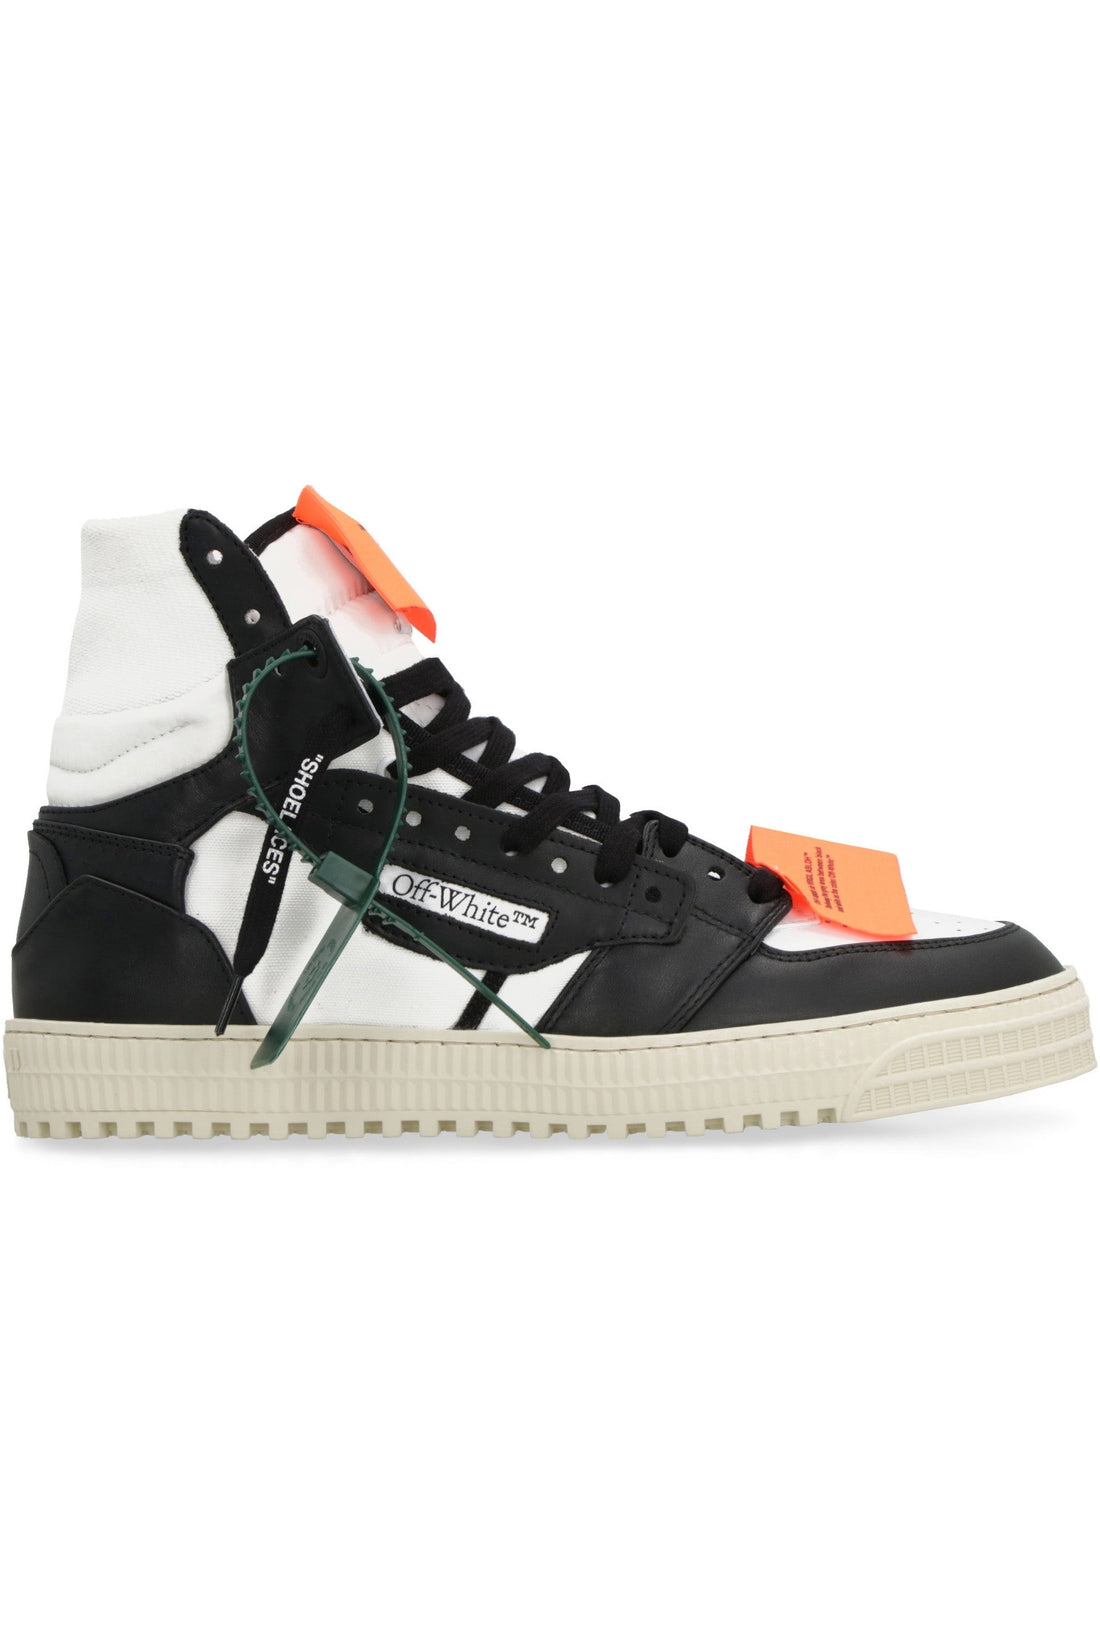 Off-White-OUTLET-SALE-3.0 Off Court high-top sneakers-ARCHIVIST